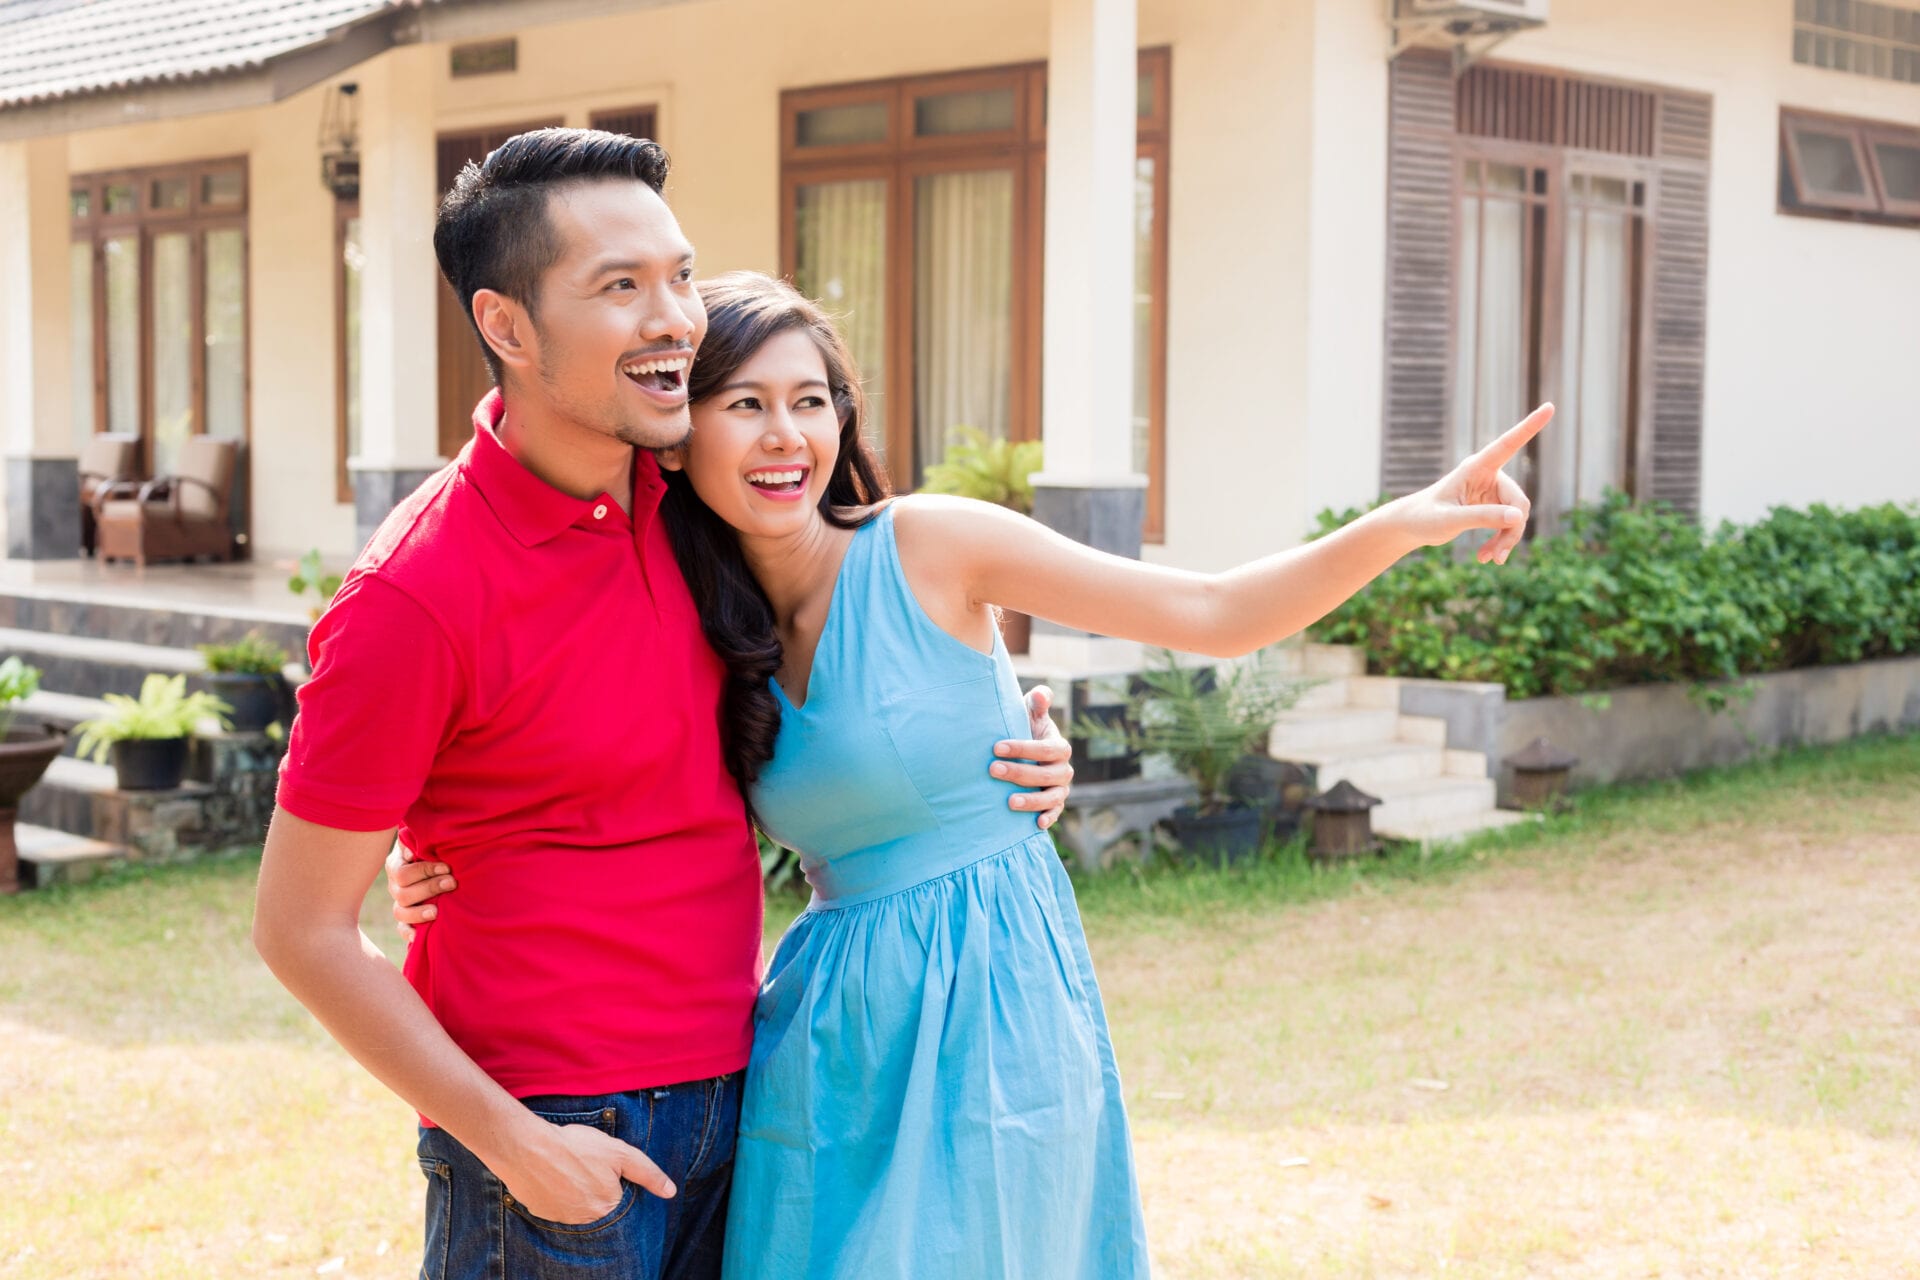 Cheerful young couple looking in the same direction in front of a cozy residential property